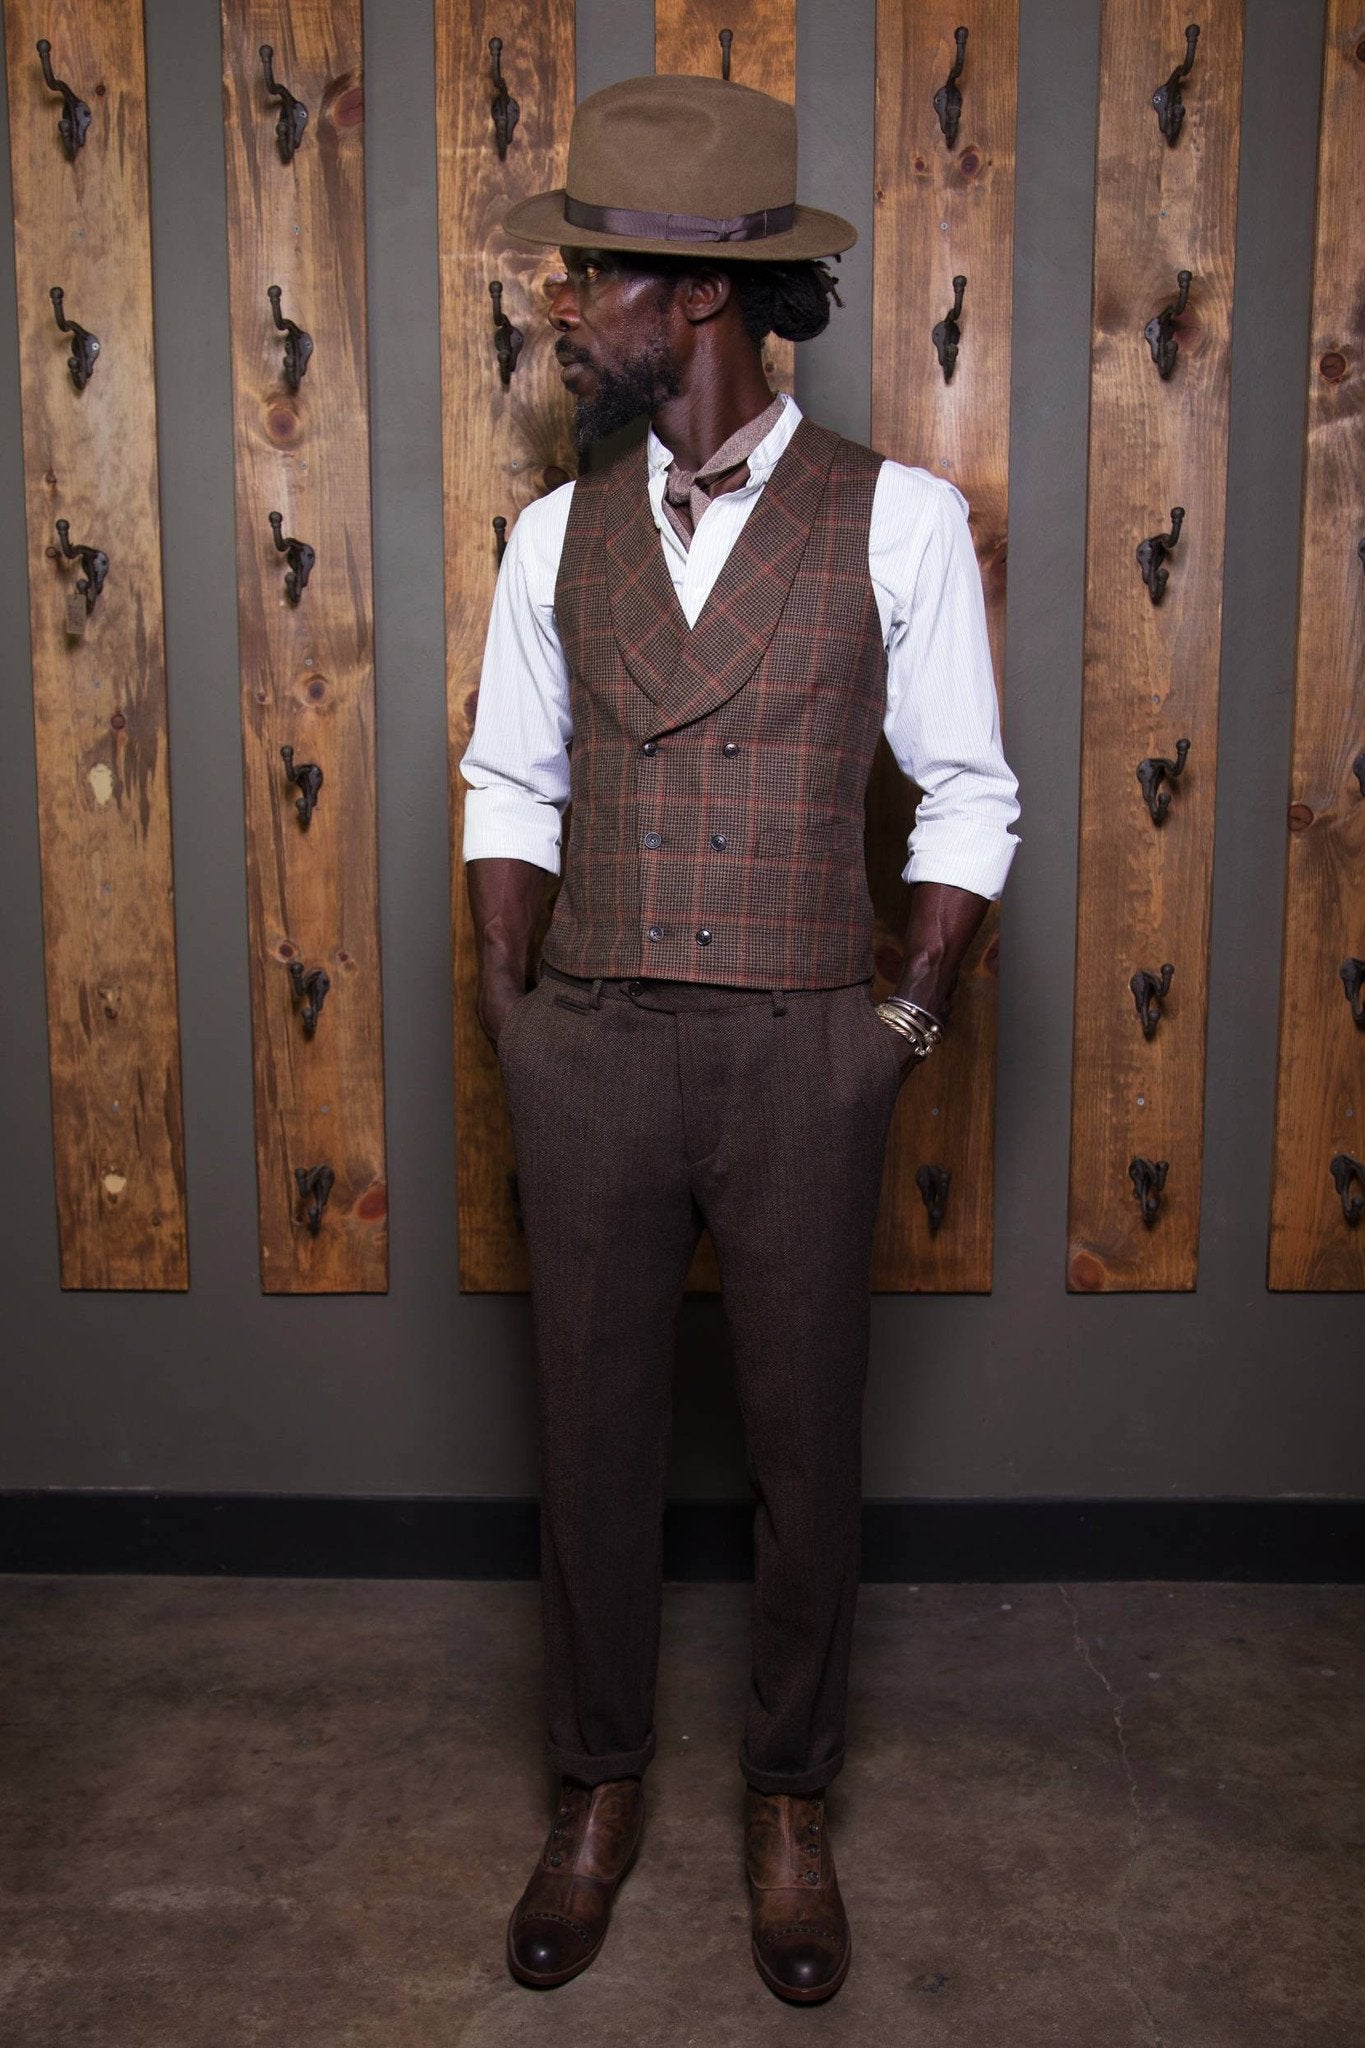 tailored fit slim fit Victorian heritage clothing peaky blinders Edwardian double breasted waistcoat Dapper Barbershop 6 button 1930's 1920's 1910's 1800's Wool vintage inspired Vest Rustic Made in USA Handcrafted